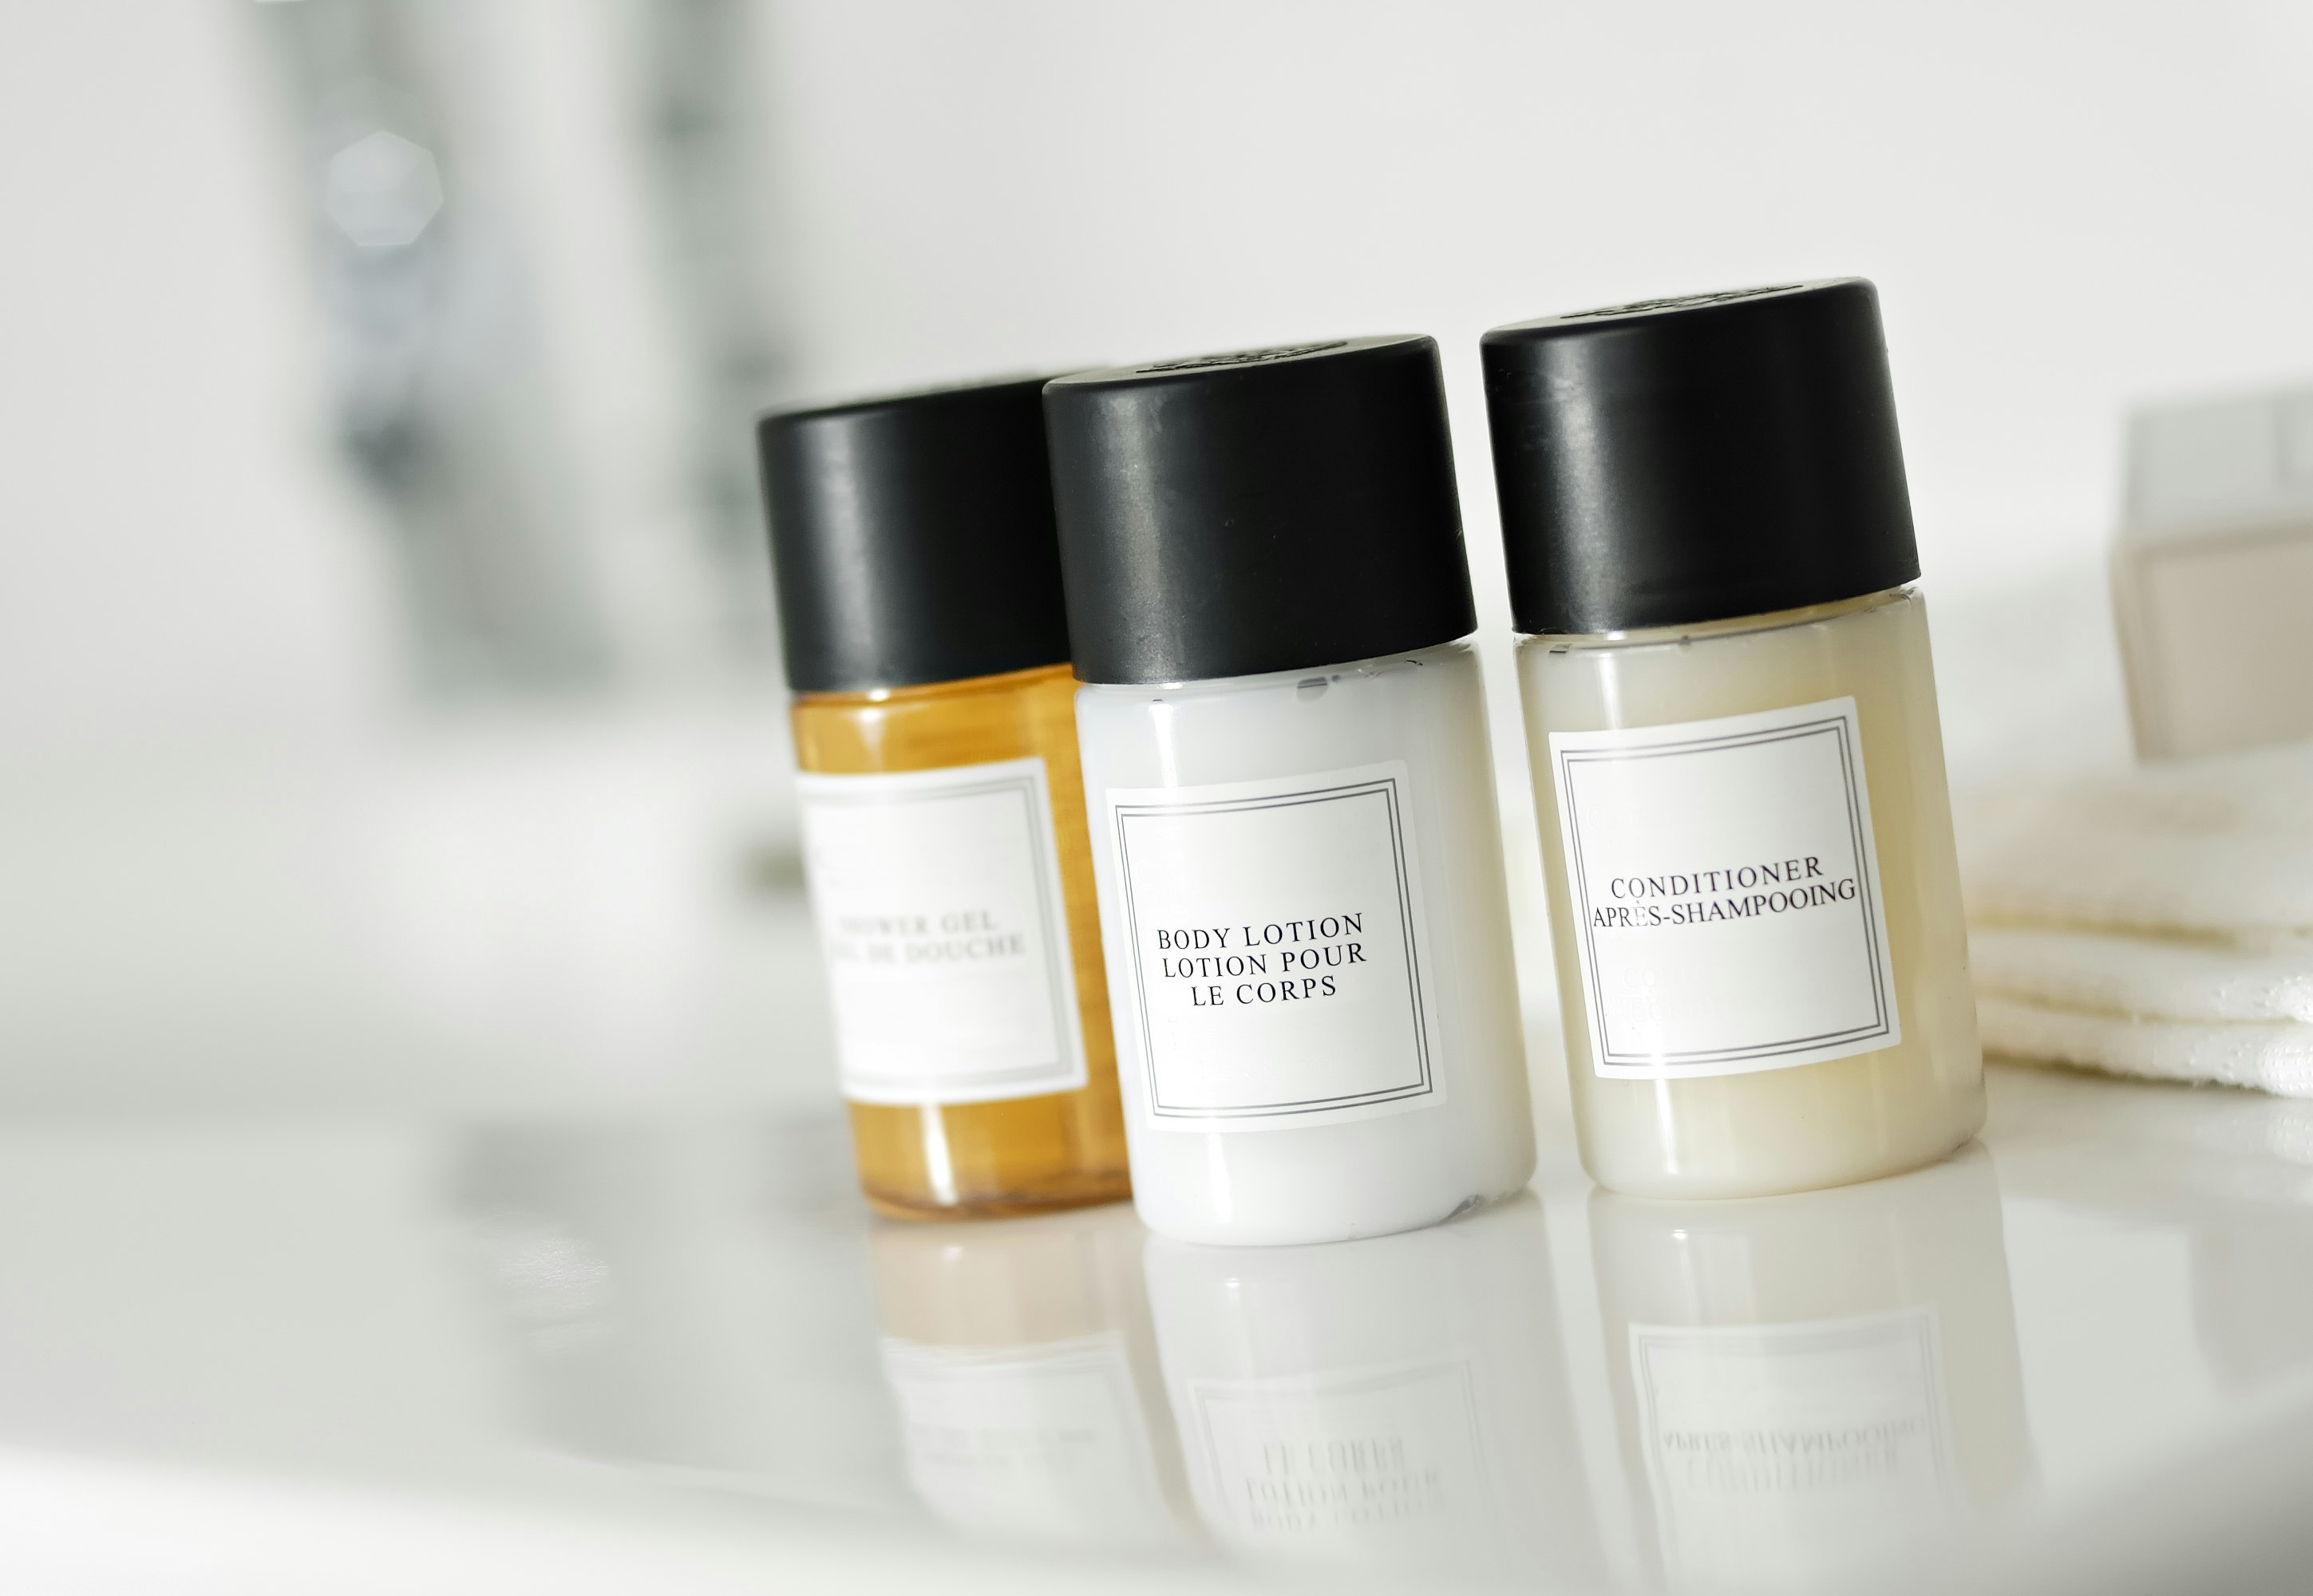 Mini shampoo, conditioner and soap bottles in minimalist packaging